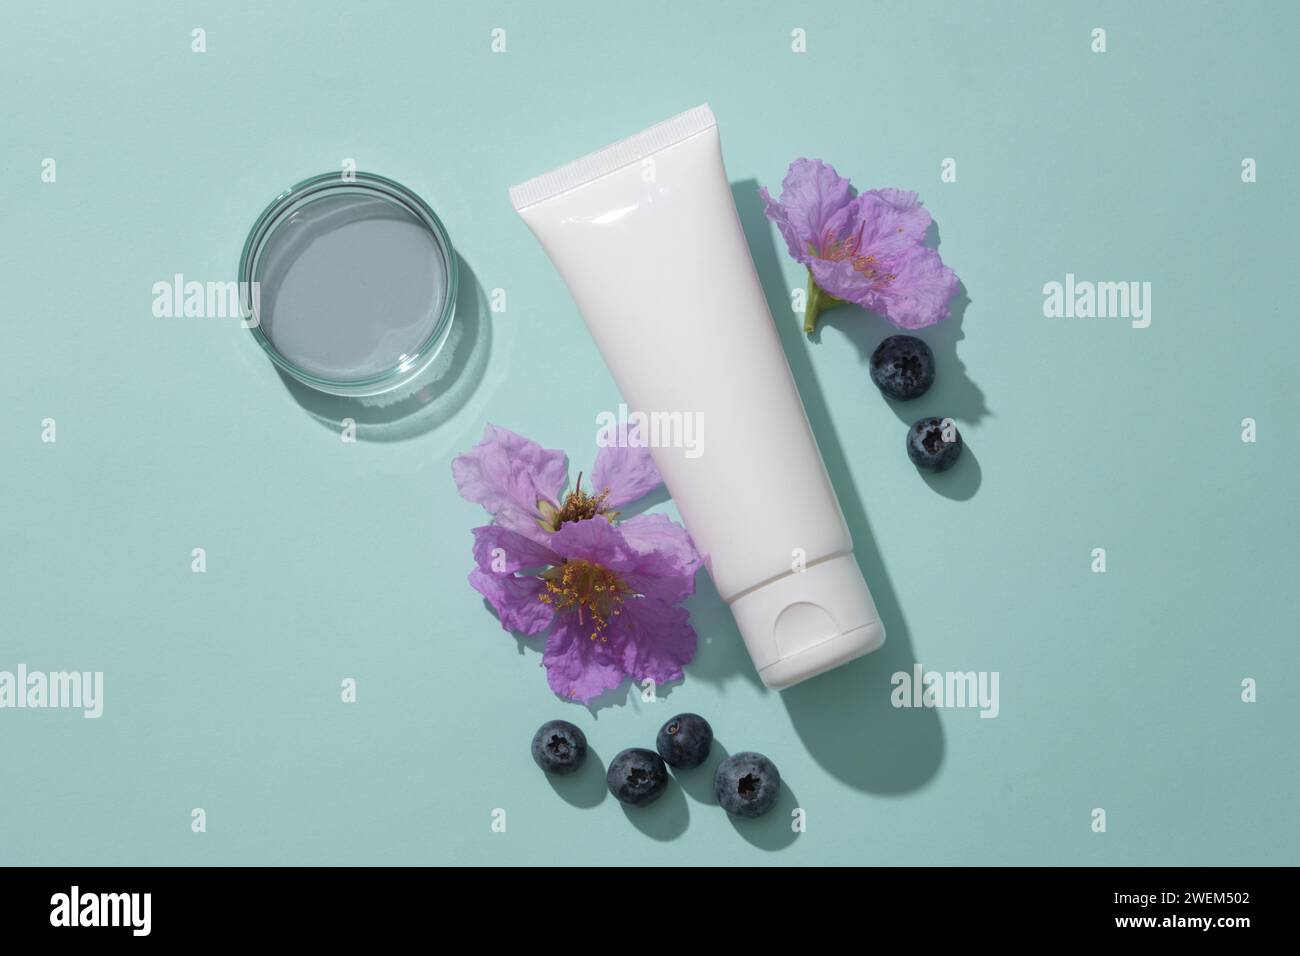 Minimal backdrop for cosmetic branding presentation - white plastic tube unlabeled container cleanser or cream, blueberries and purple flowers decorat Stock Photo